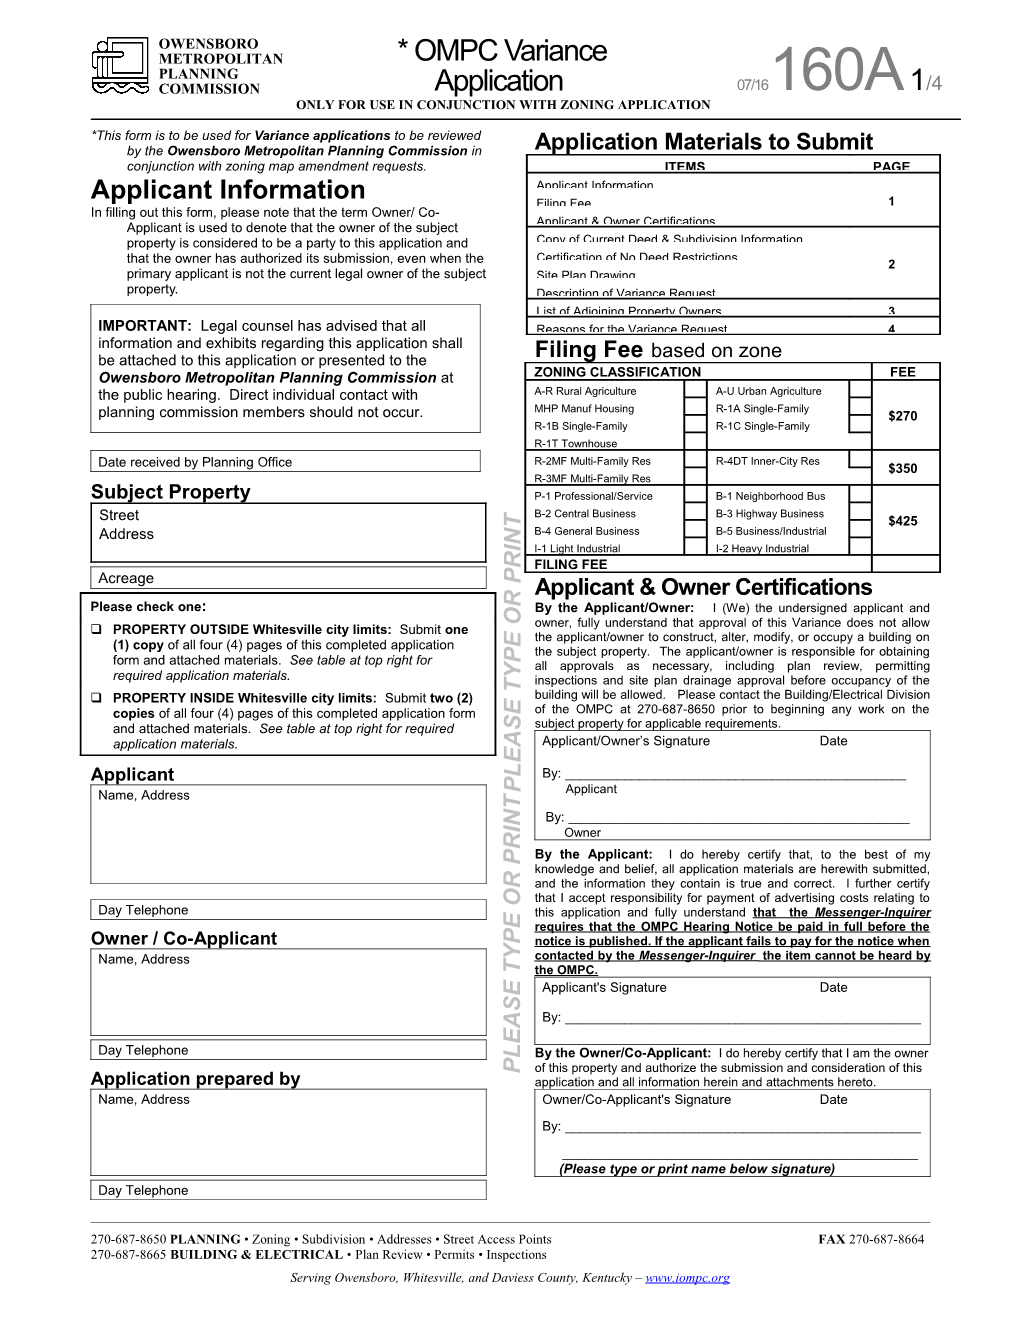 *This Form Is to Be Used for Variance Applications to Be Reviewed by the Owensboro Metropolitan